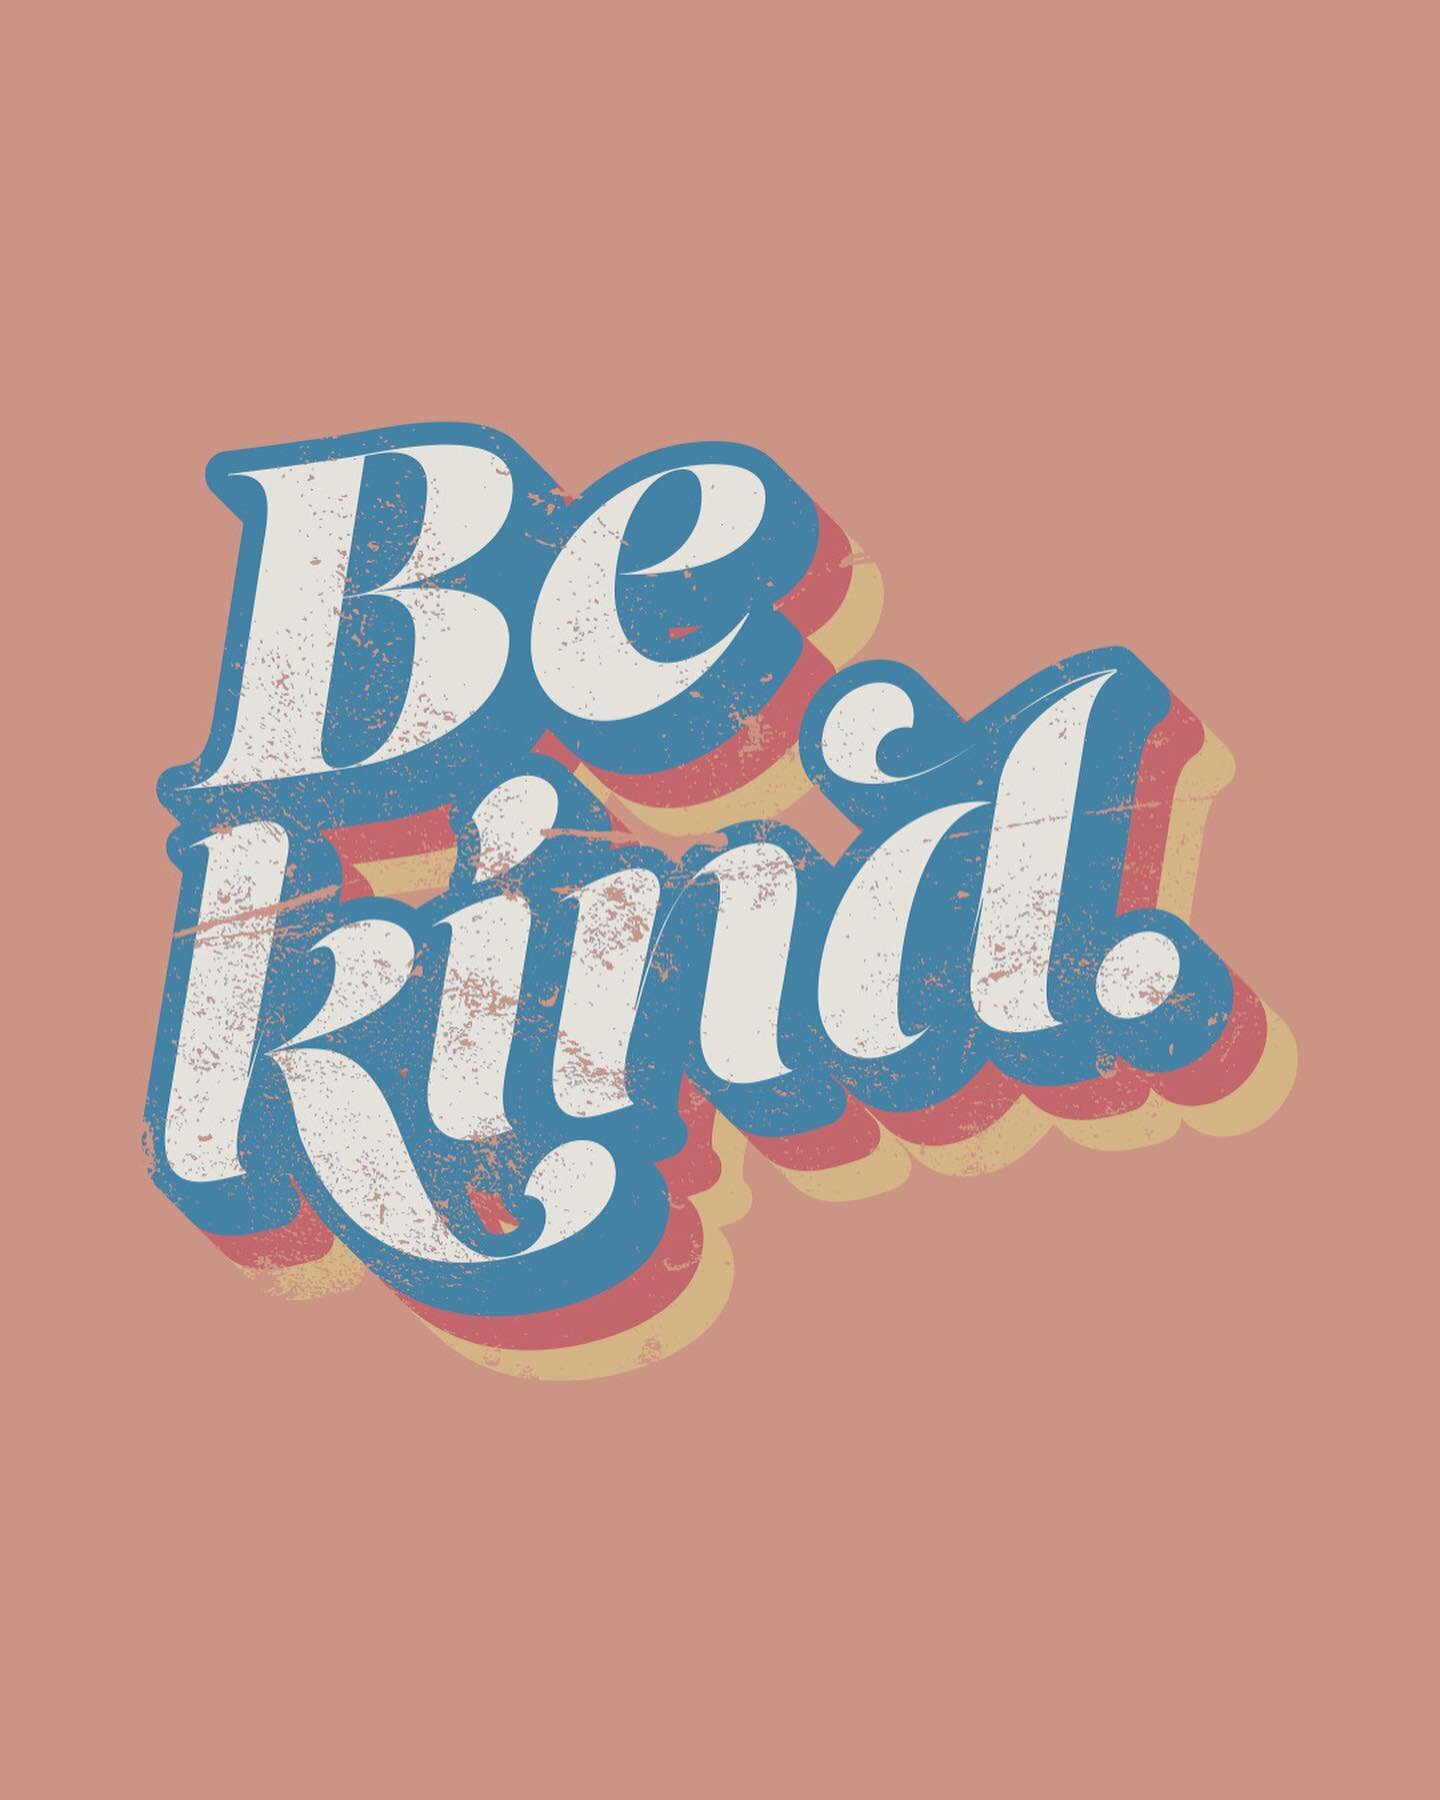 I FINALLY got around to adding this design to my @Redbubble shop and now I'm mad at myself for not doing it sooner. Those tees! 😍 AND it makes the CUTEST mask!
⠀⠀⠀⠀⠀⠀⠀⠀⠀
Retro Be Kind Tees, Masks + Other Products Available Here: https://rdbl.co/2EJK